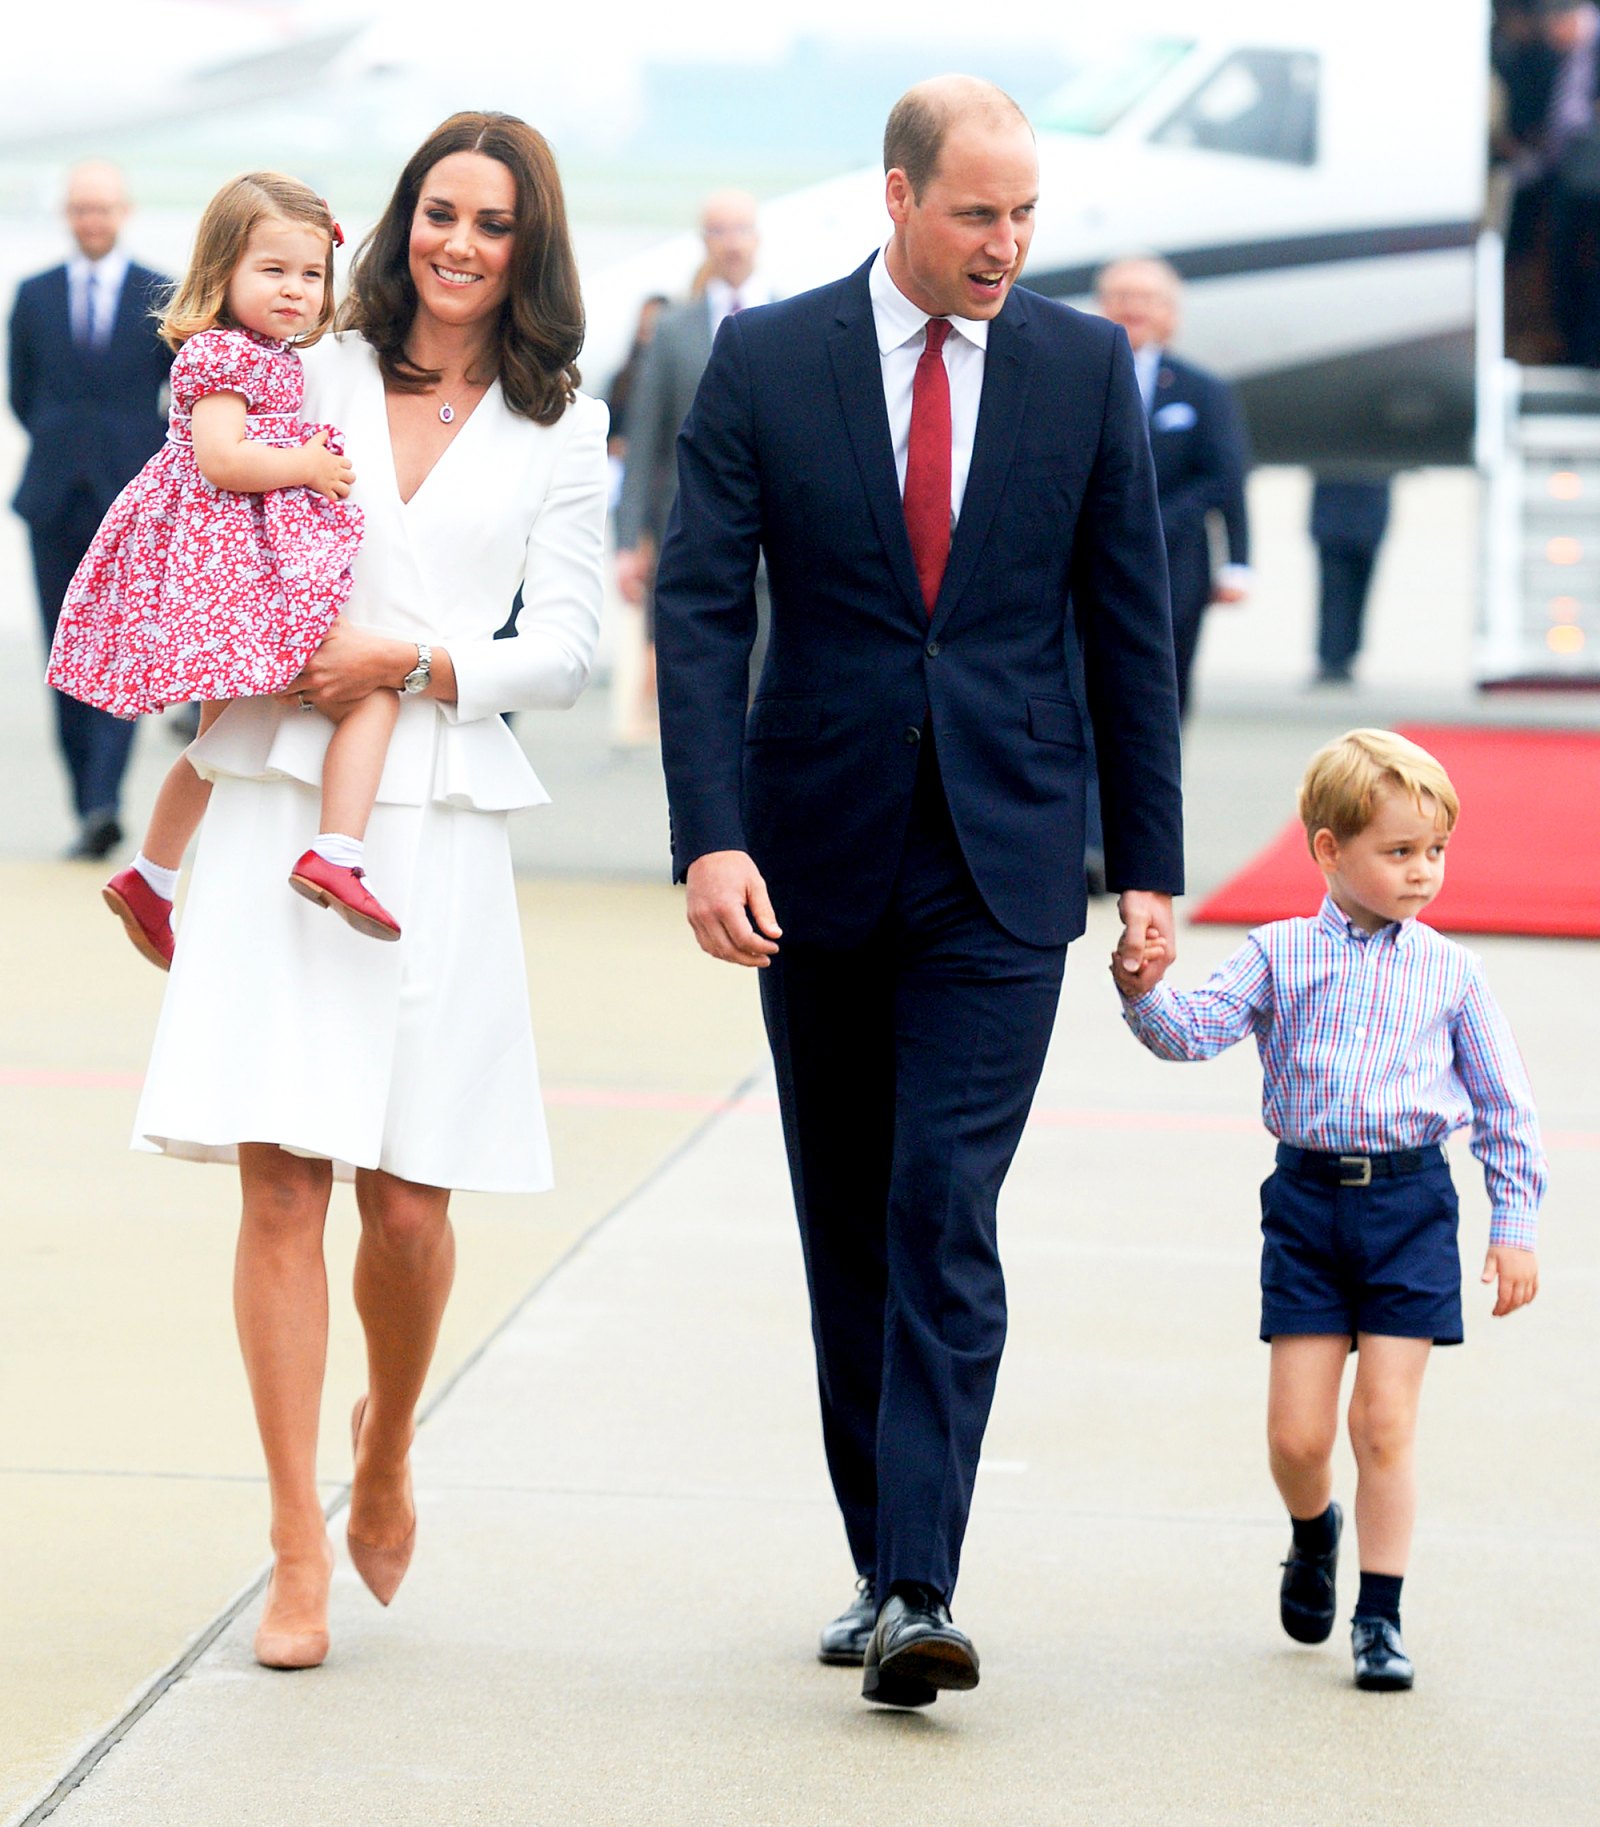 Catherine, Duchess of Cambridge, Princess Charlotte of Cambridge, Prince William, Duke of Cambridge and Prince George of Cambridge arrive at Warsaw airport on July 17, 2017 in Warsaw, Poland.